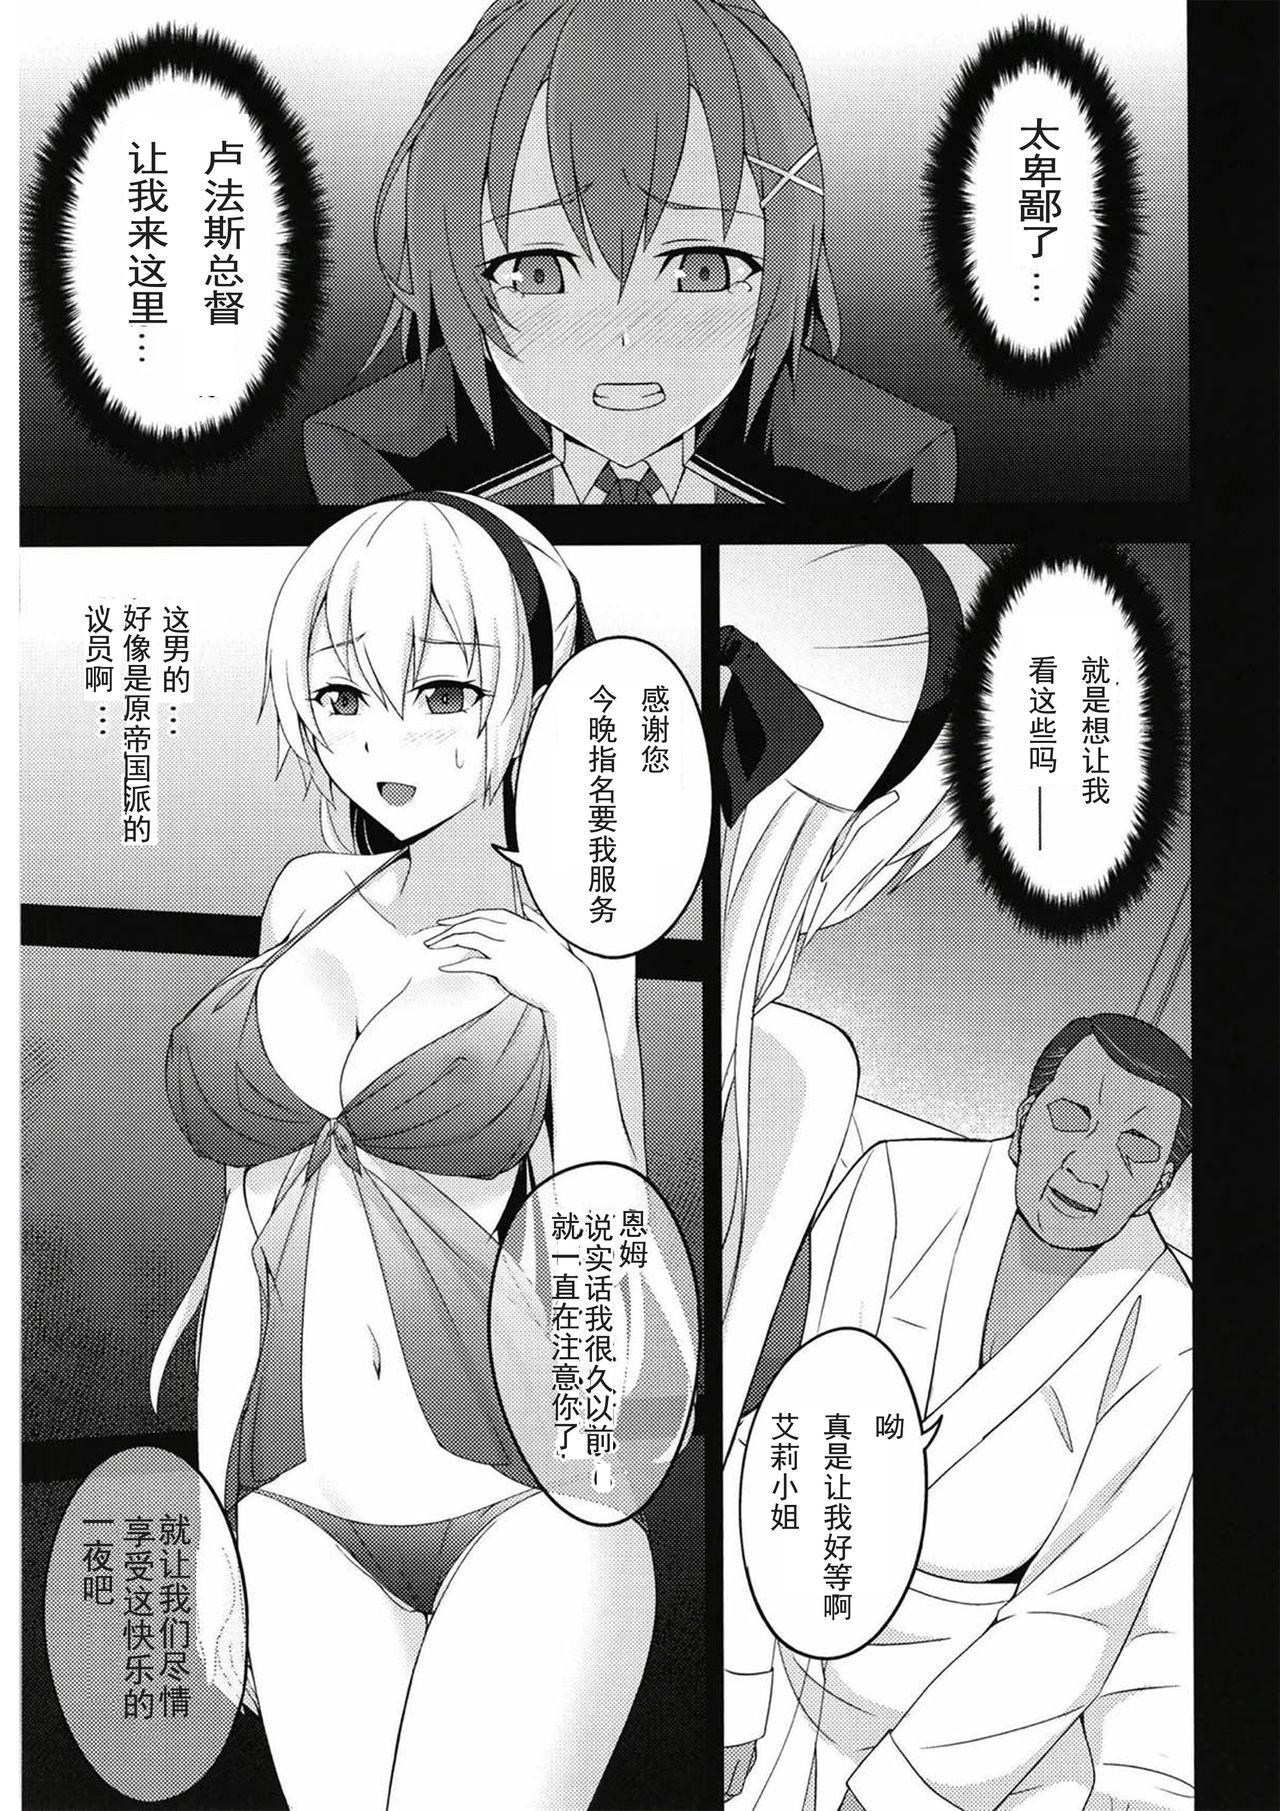 Bus Torikago no Yoru - The legend of heroes Shaven - Page 10